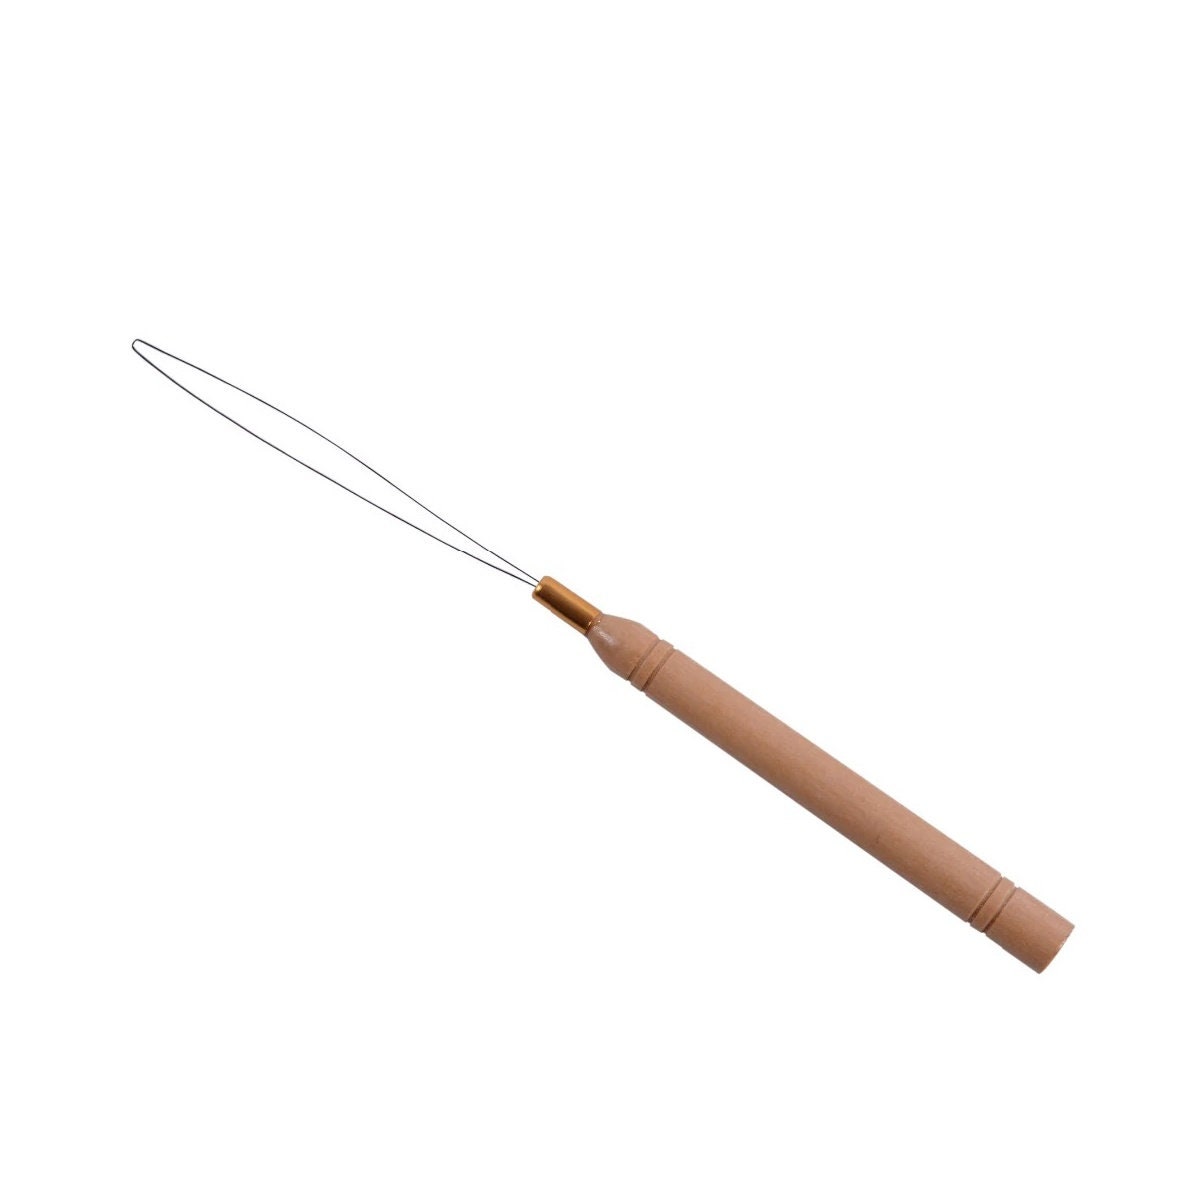 Laurel Hill Crochet Hooks Micro Ring Hair Extension Wooden Pulling Needle  Threader Feather Hook Tool For Hair Extensions From Harmonywigs, $1.34